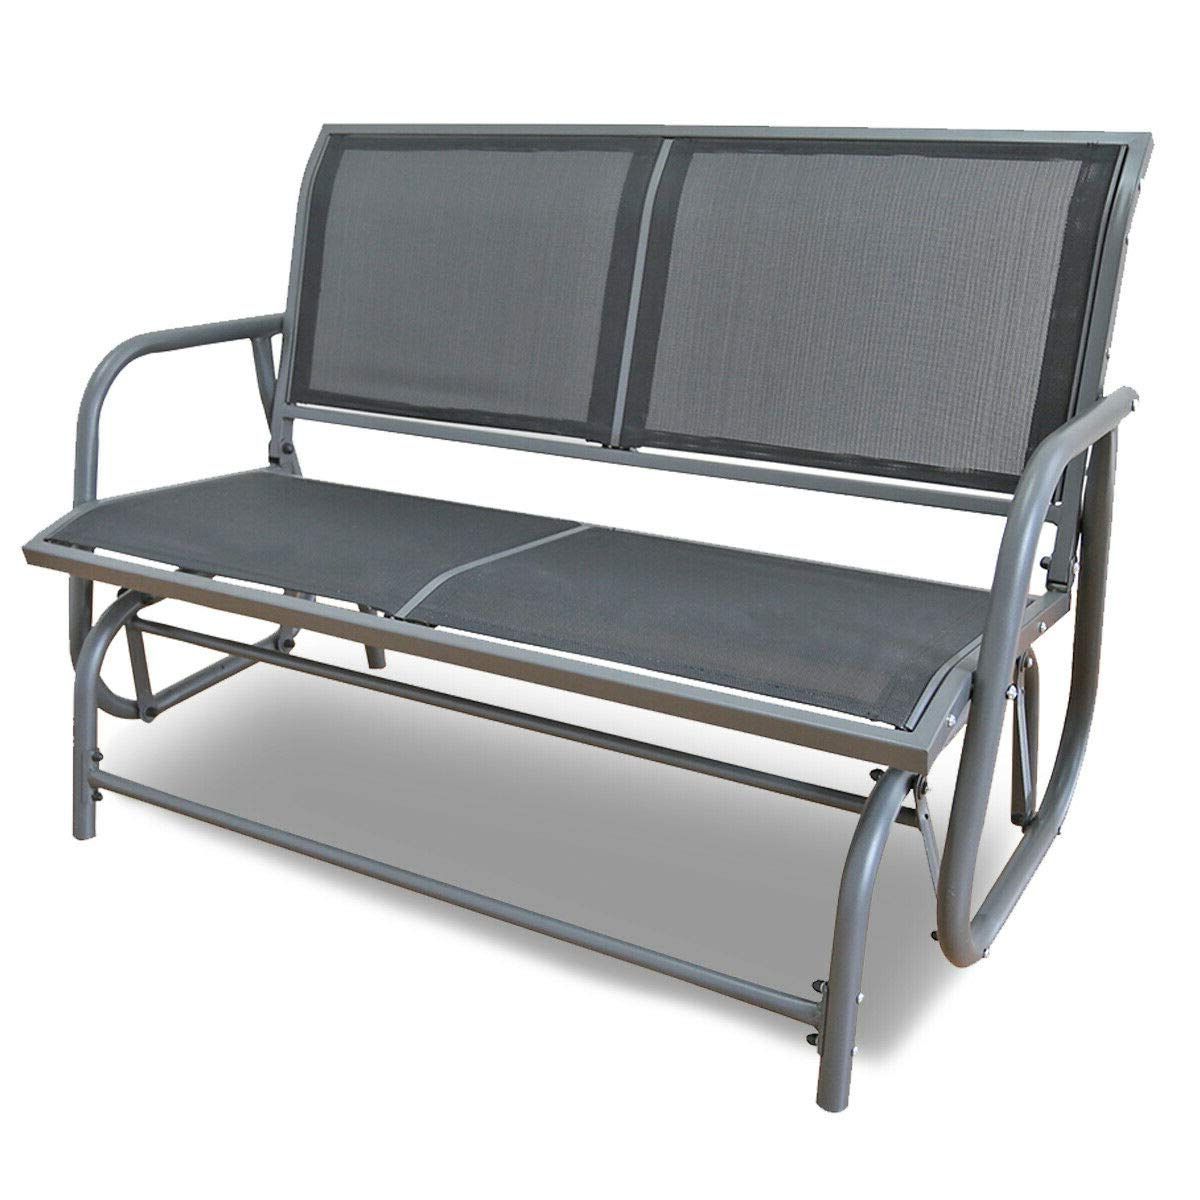 Recent Outdoor Steel Patio Swing Glider Benches Within Amazon : Grey Patio Swing Glider Bench For 2 Persons (View 7 of 30)